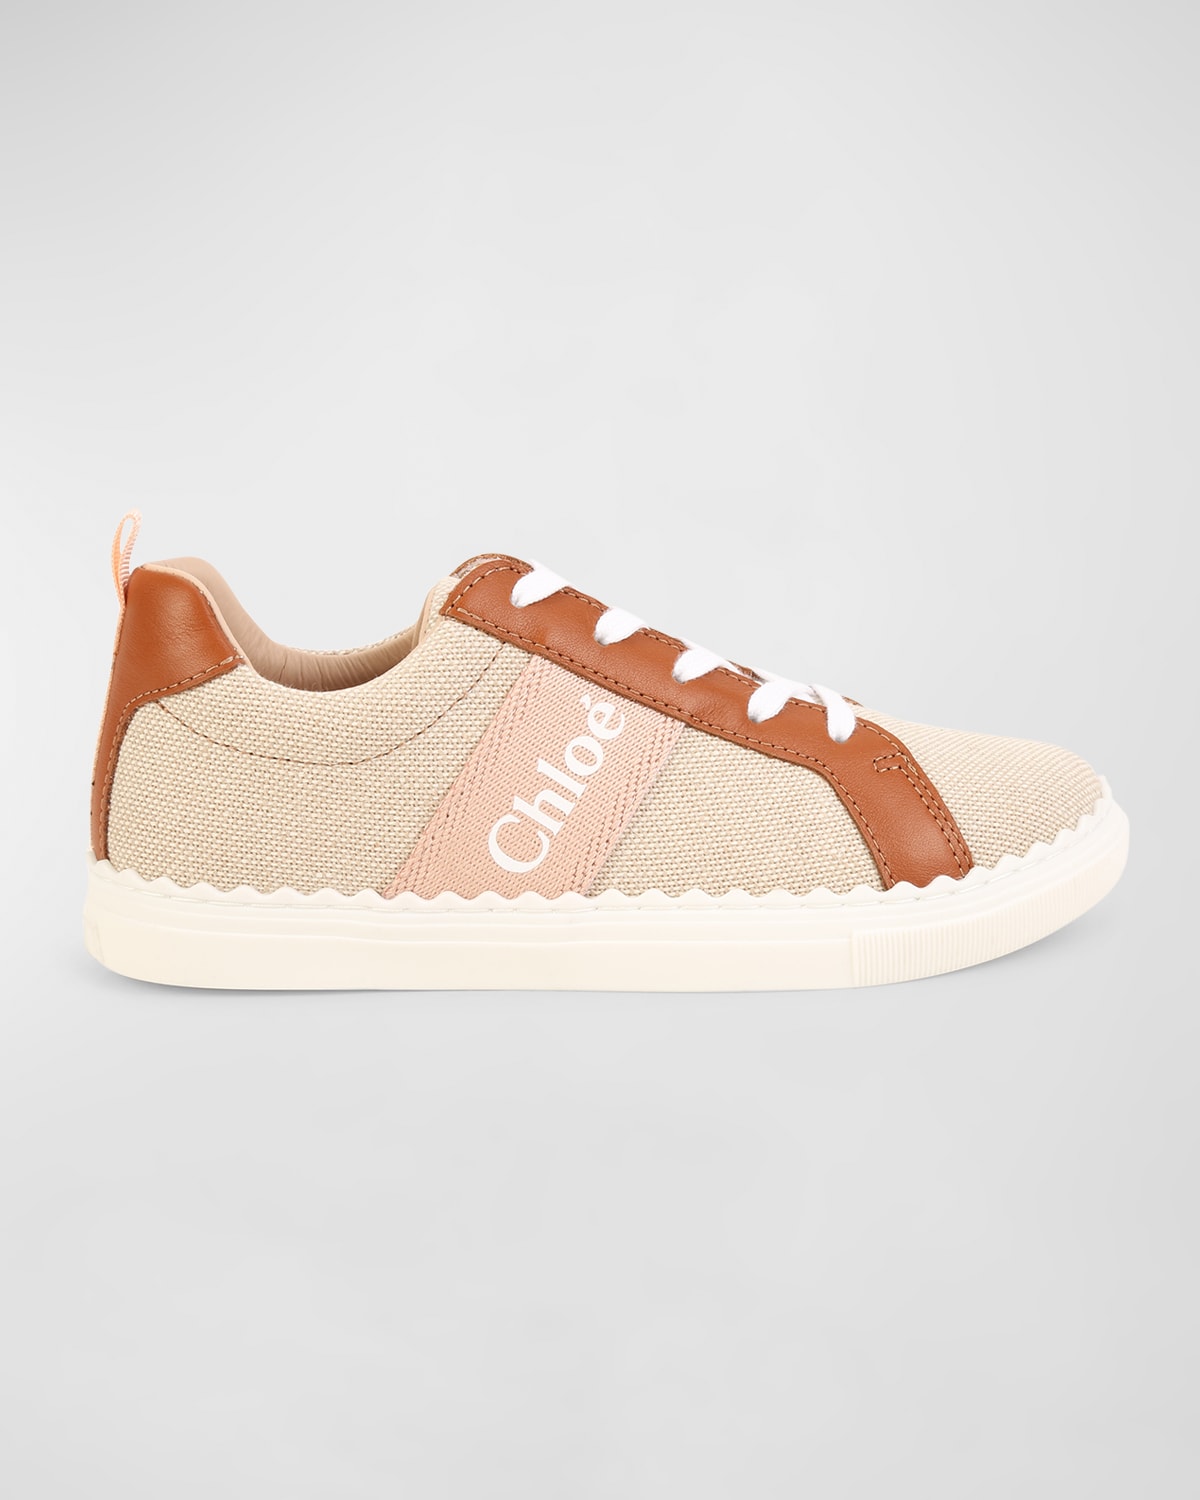 CHLOÉ GIRL'S CANVAS AND LEATHER LOGO SNEAKERS, TODDLER/KID